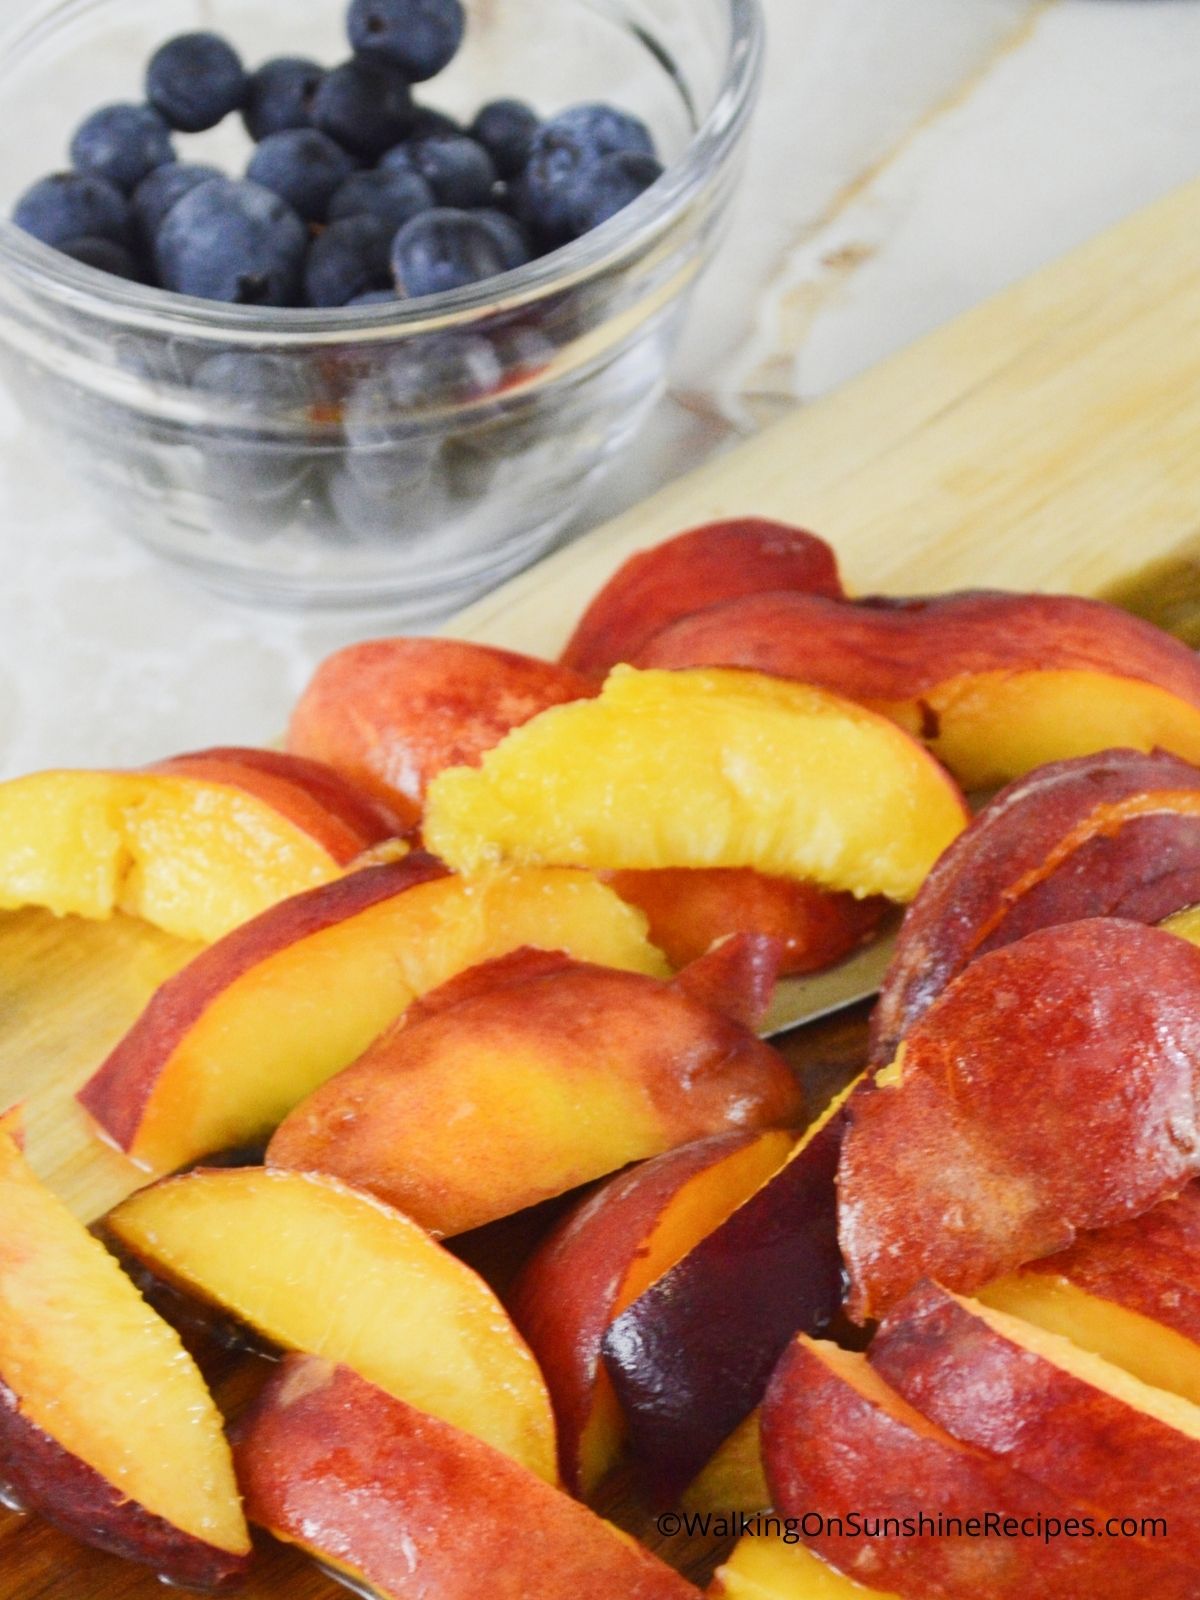 Sliced peaches and blueberries. 